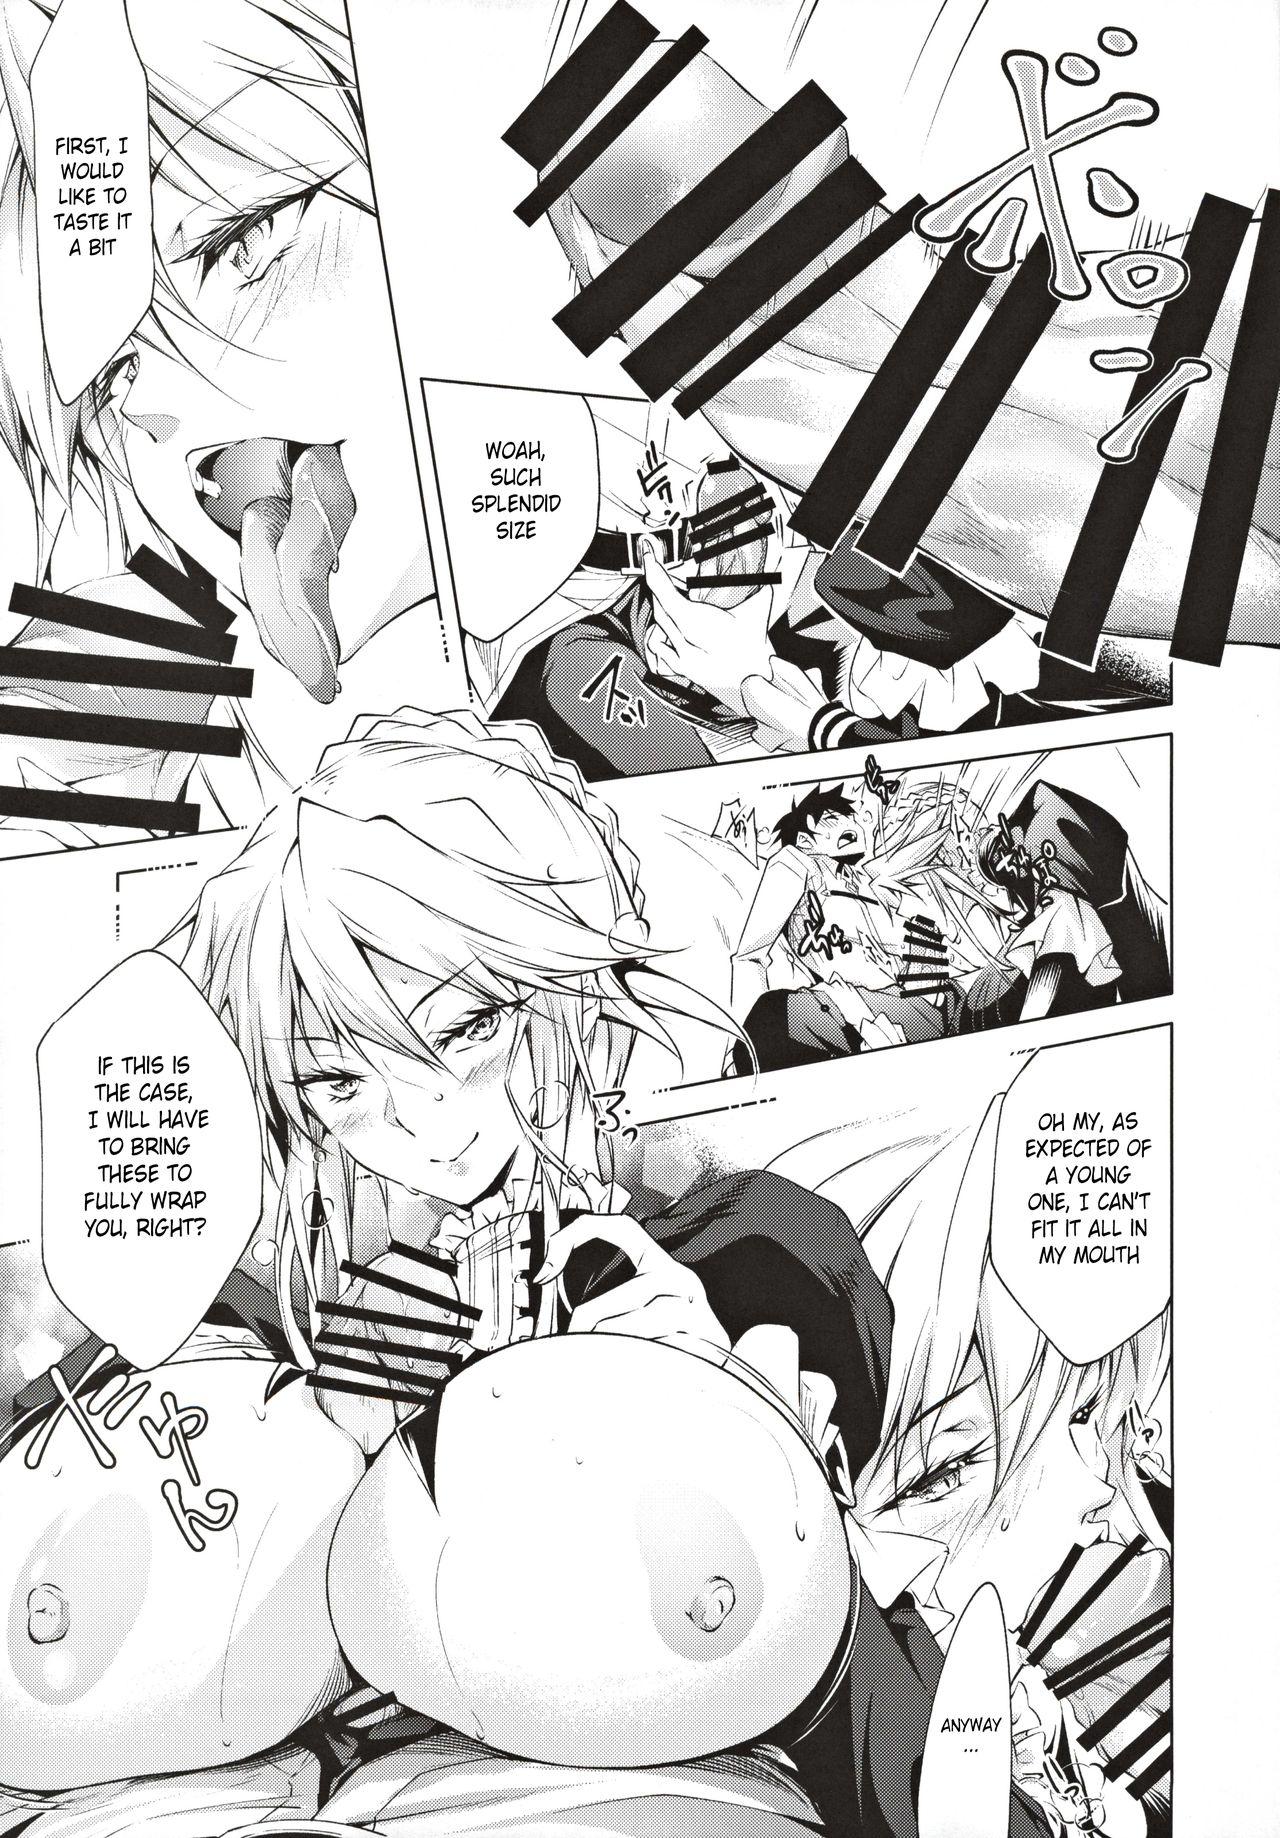 Gay Physicals Pendra Shimai no Seijijou | The Pendragon twin sisters' sexual situation - Fate grand order Reverse - Page 8